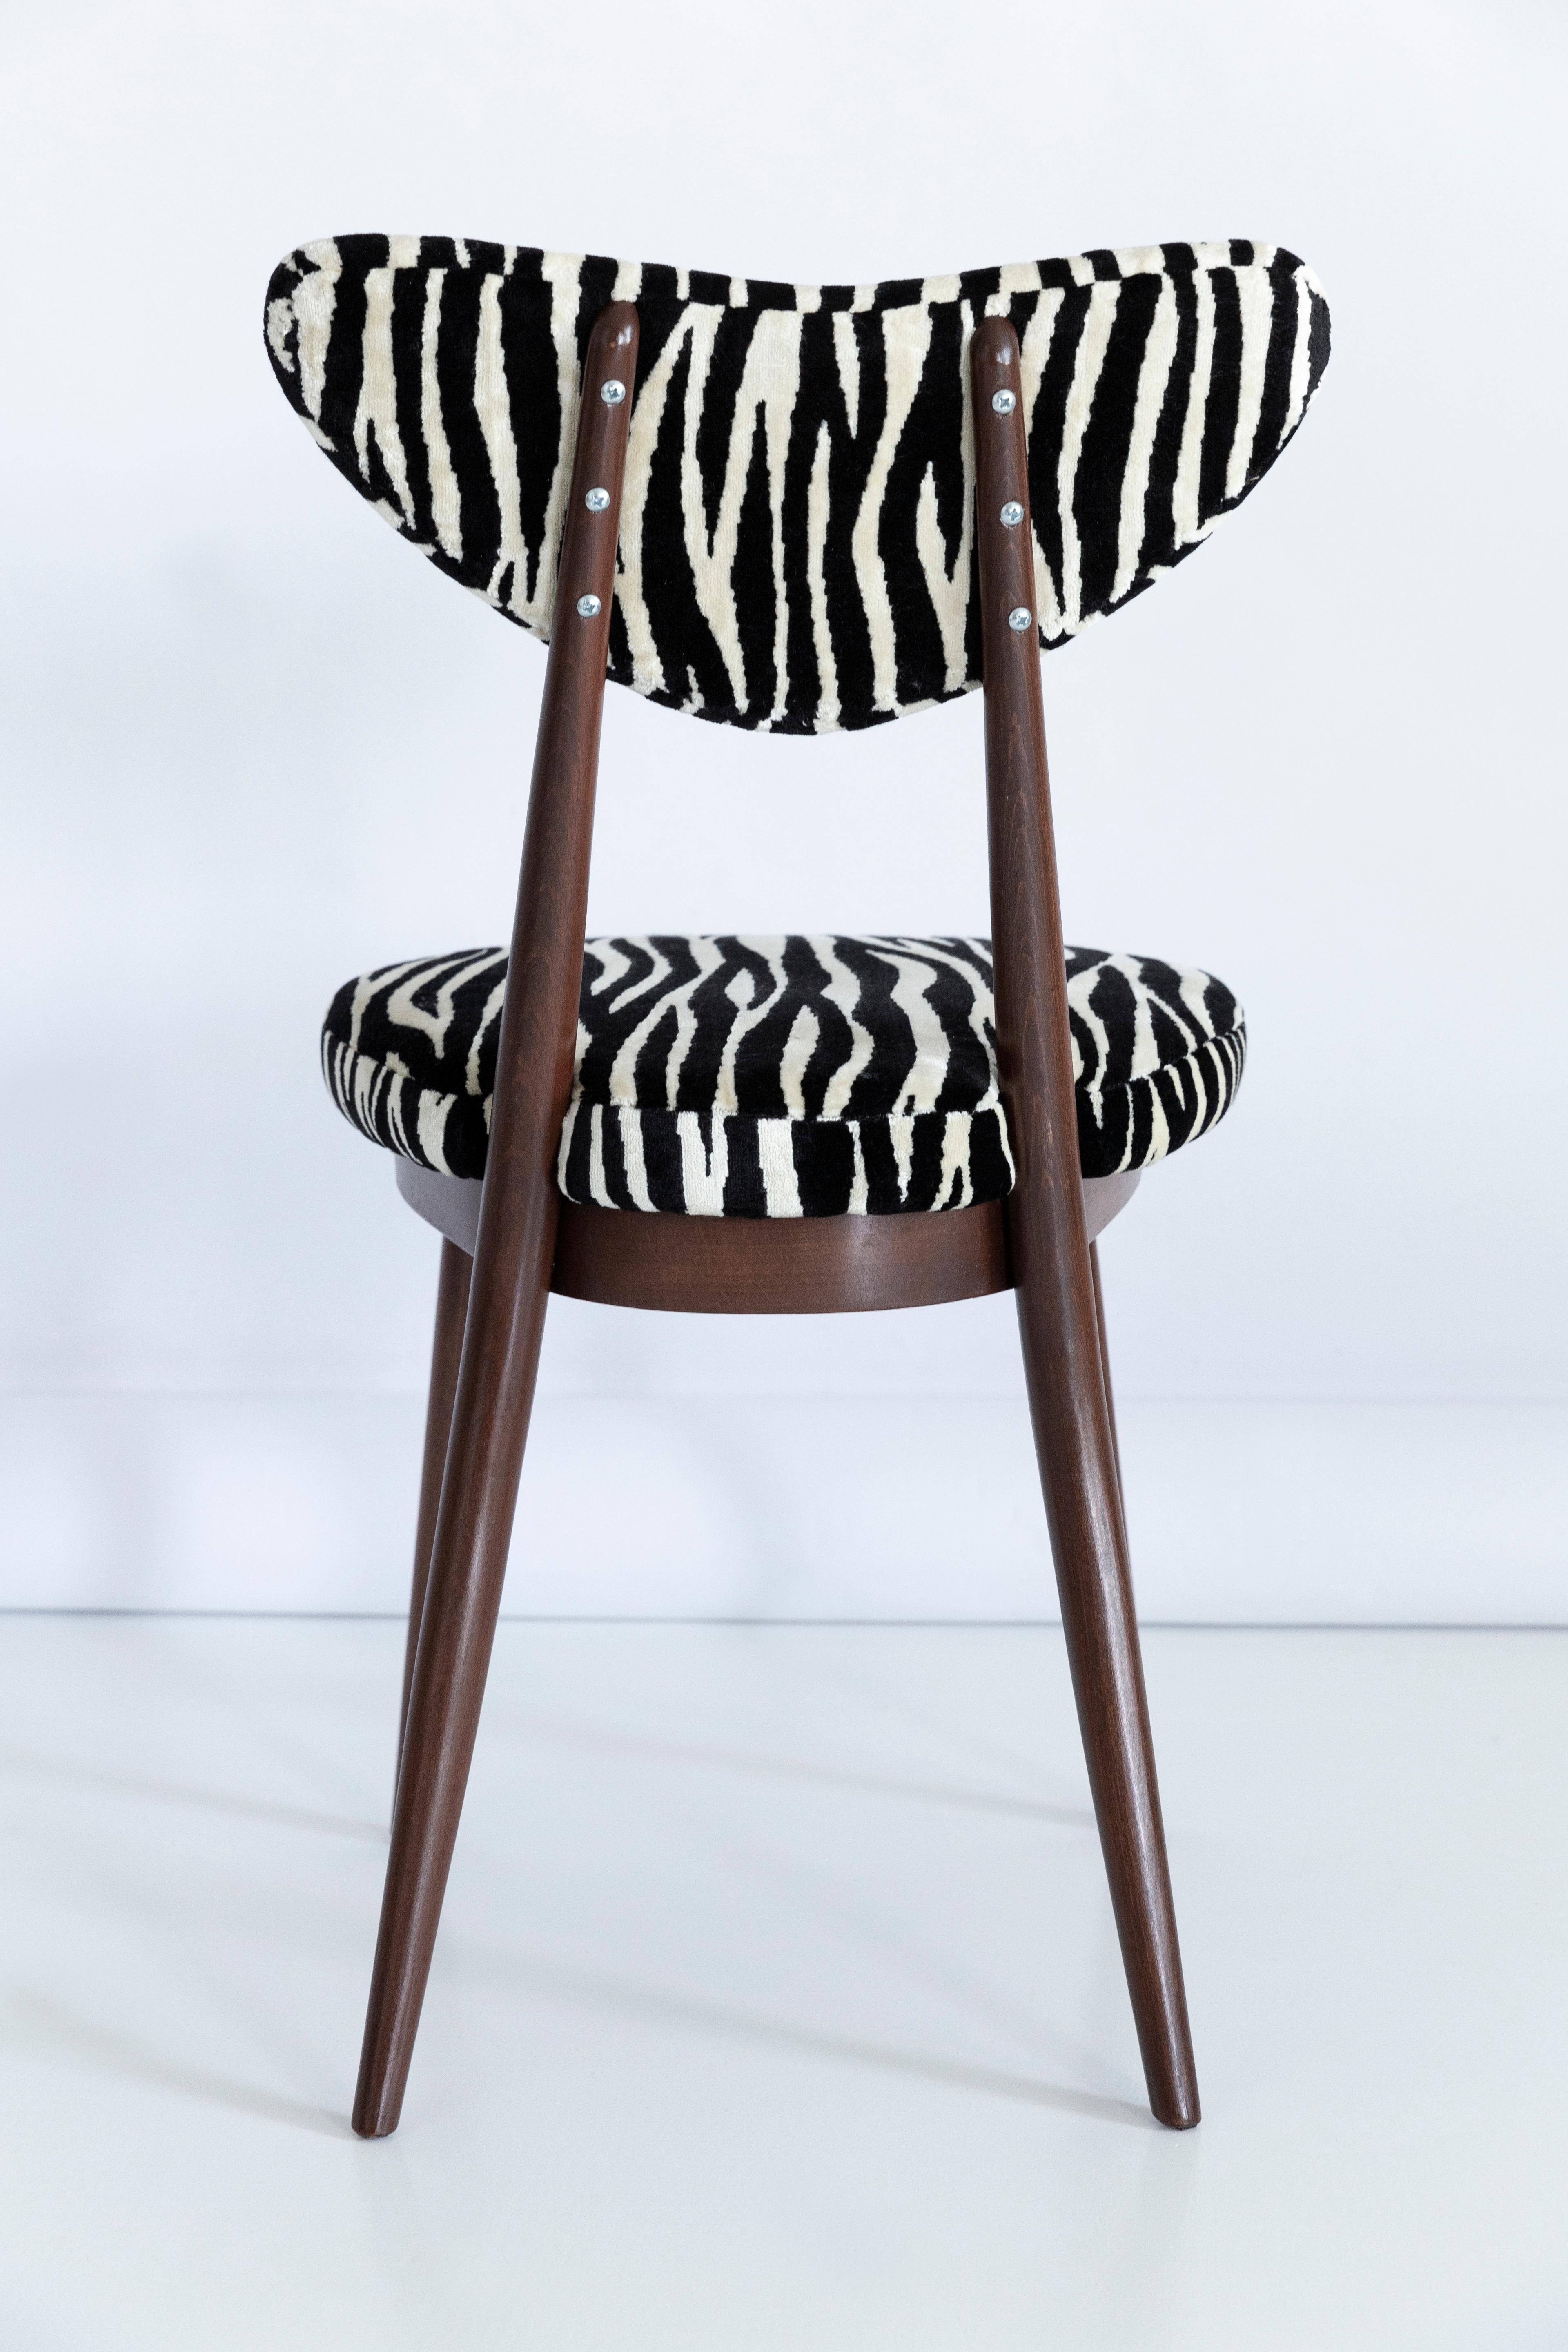 Set of Six Midcentury Zebra Black and White Heart Chairs, Poland, 1960s For Sale 2